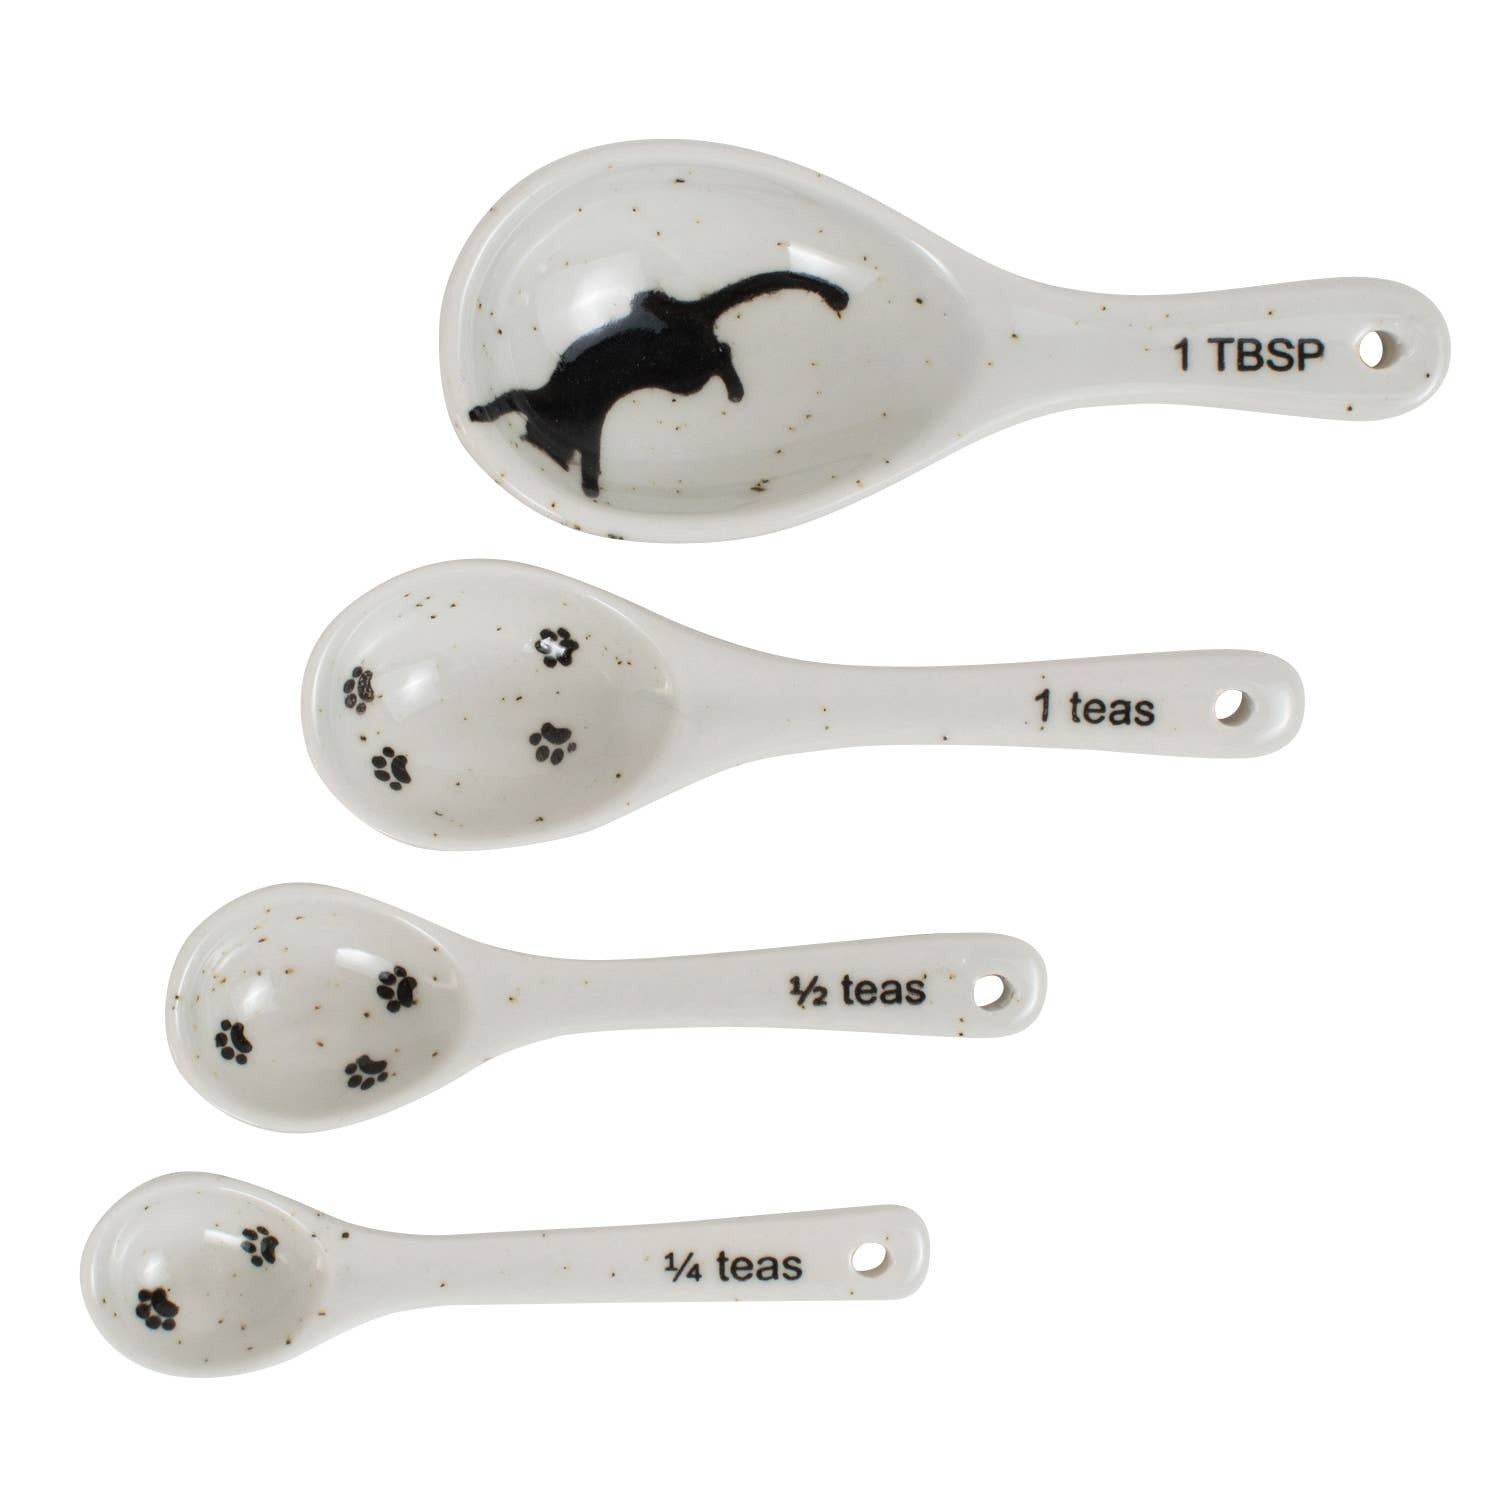 Kitty Cat Measuring Spoons Ceramic Kitsch Set of 4 As/Is